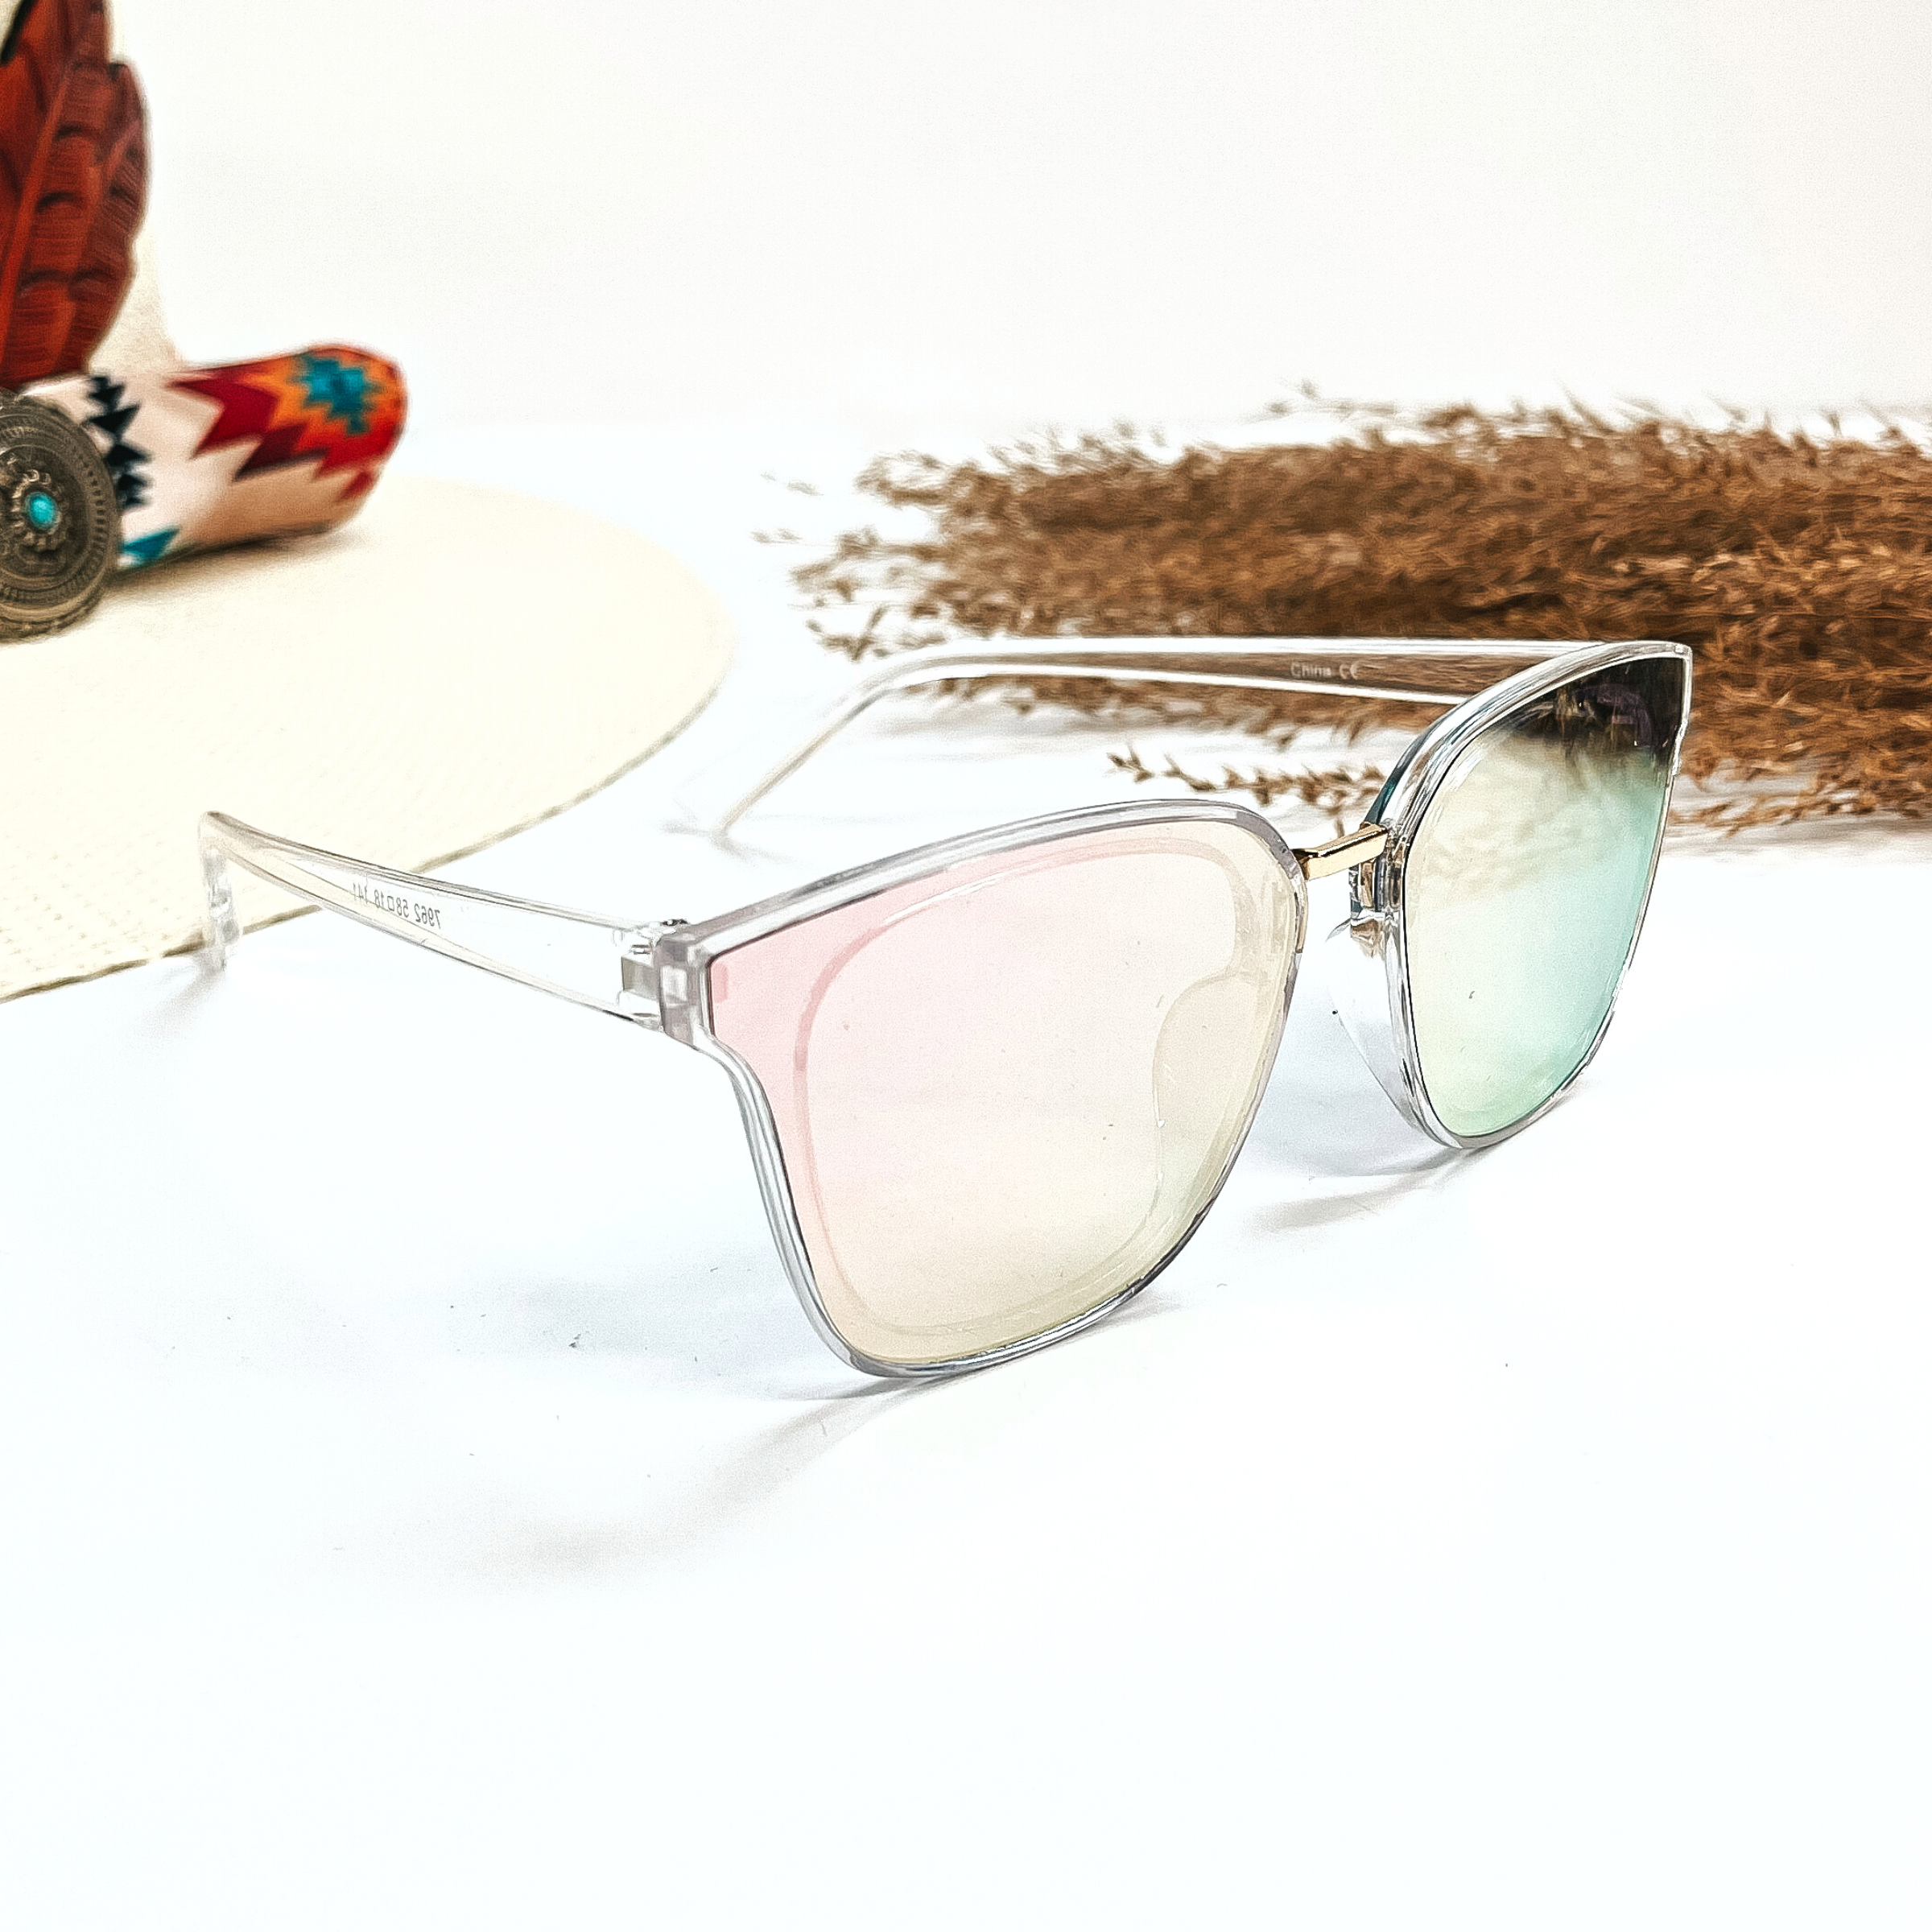 This is a pair of wayfarer style sunglasses with a transparent/clear frame,  coral/light green lense. These sunglasses are taken on a white  background, there is a straw hat with a colorful aztec print hat band and a brown plant  in the side as decor.